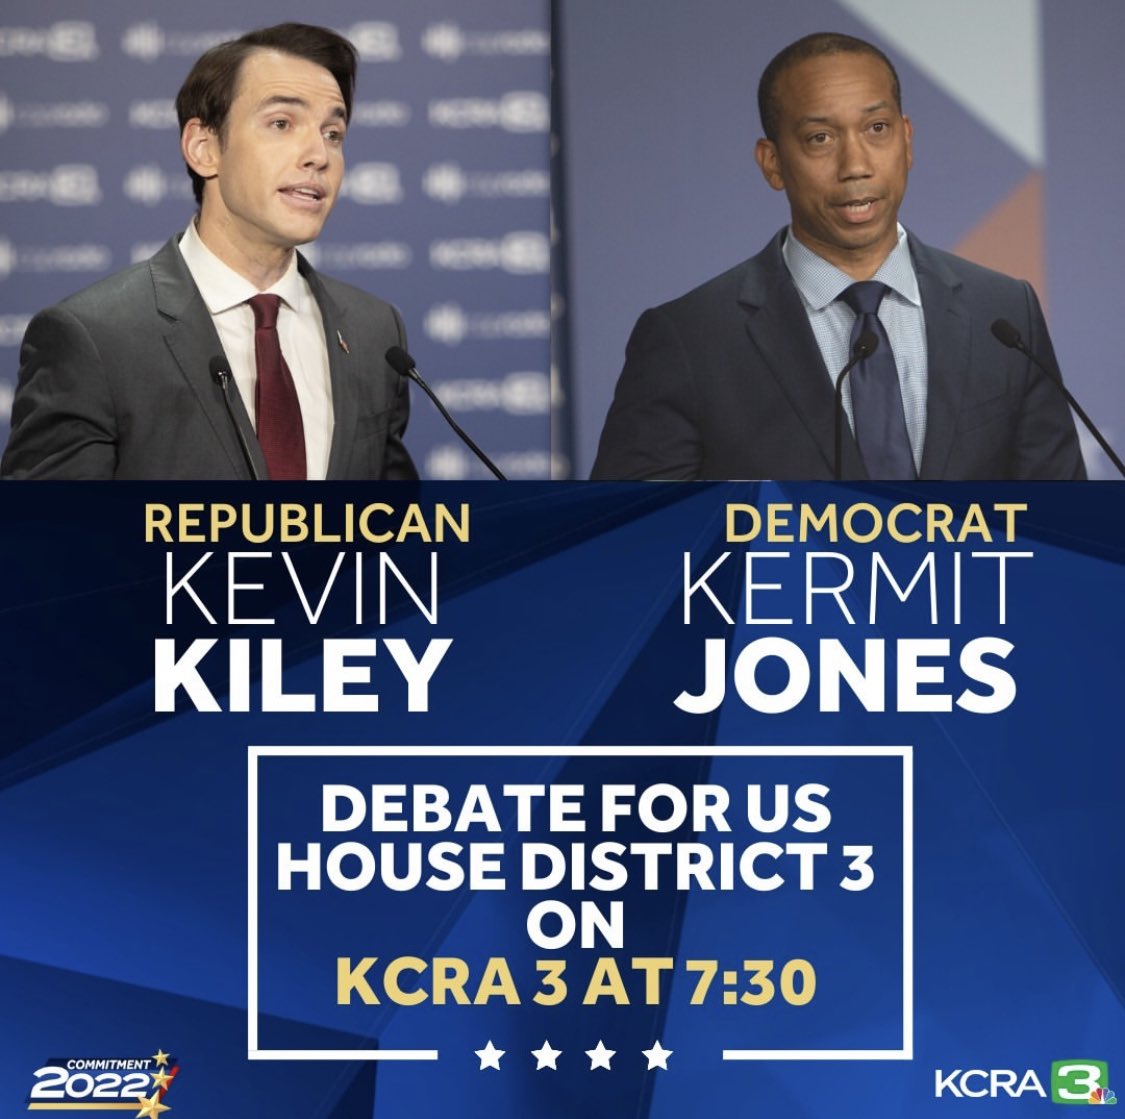 Debate night at @kcranews! Tonight at 7:30 @KCRAEdieLambert and @CapRadioNews are hosting a live debate for Democrat Kermit Jones and Republican Kevin Kiley, candidates for the 3rd Congressional District. #Debate #Midterms